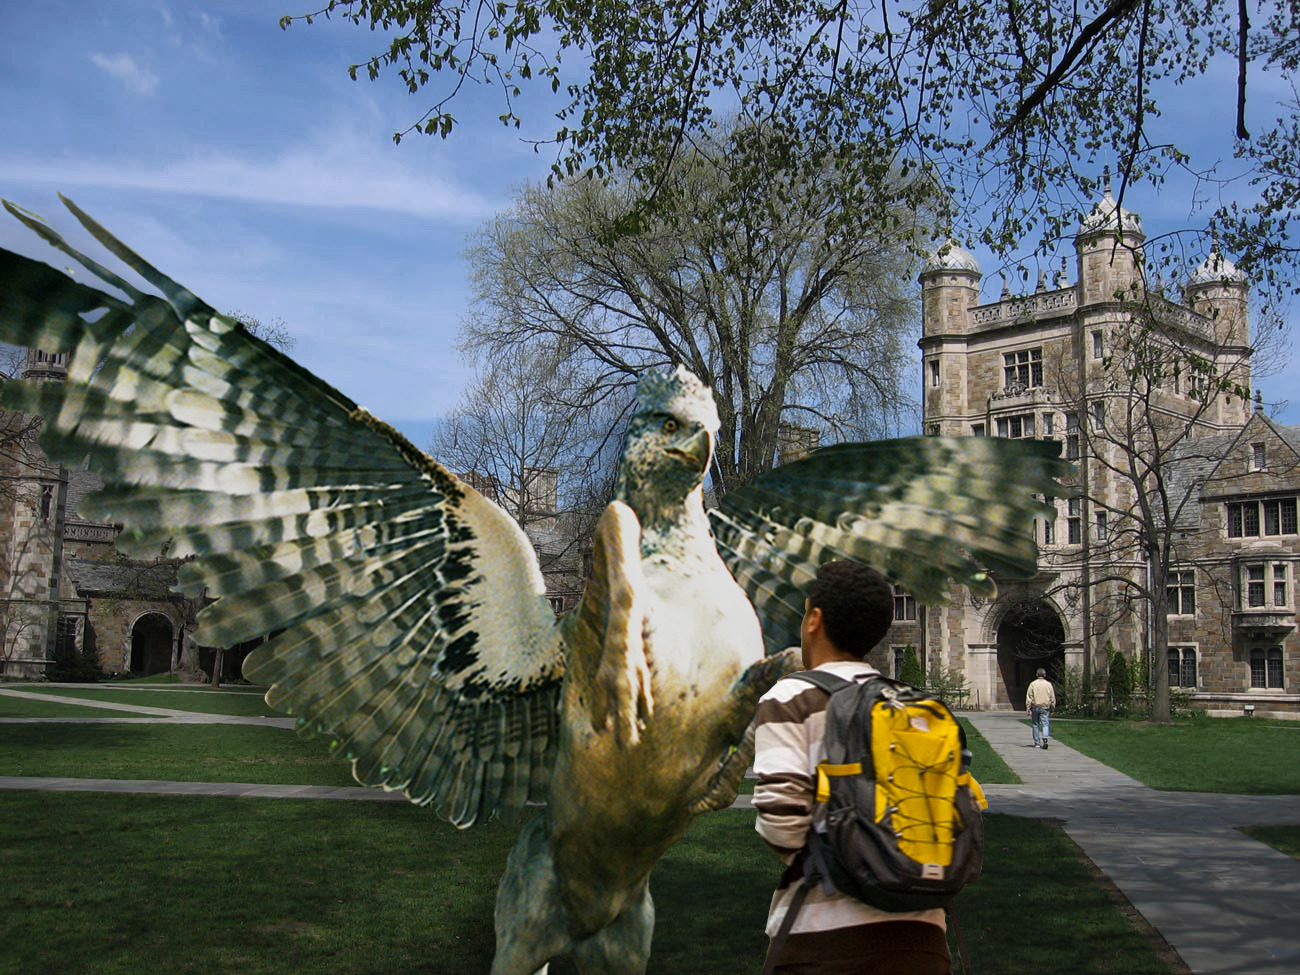 A student with a yellow backpack is attacked by a Hippogriff in the Law Quad